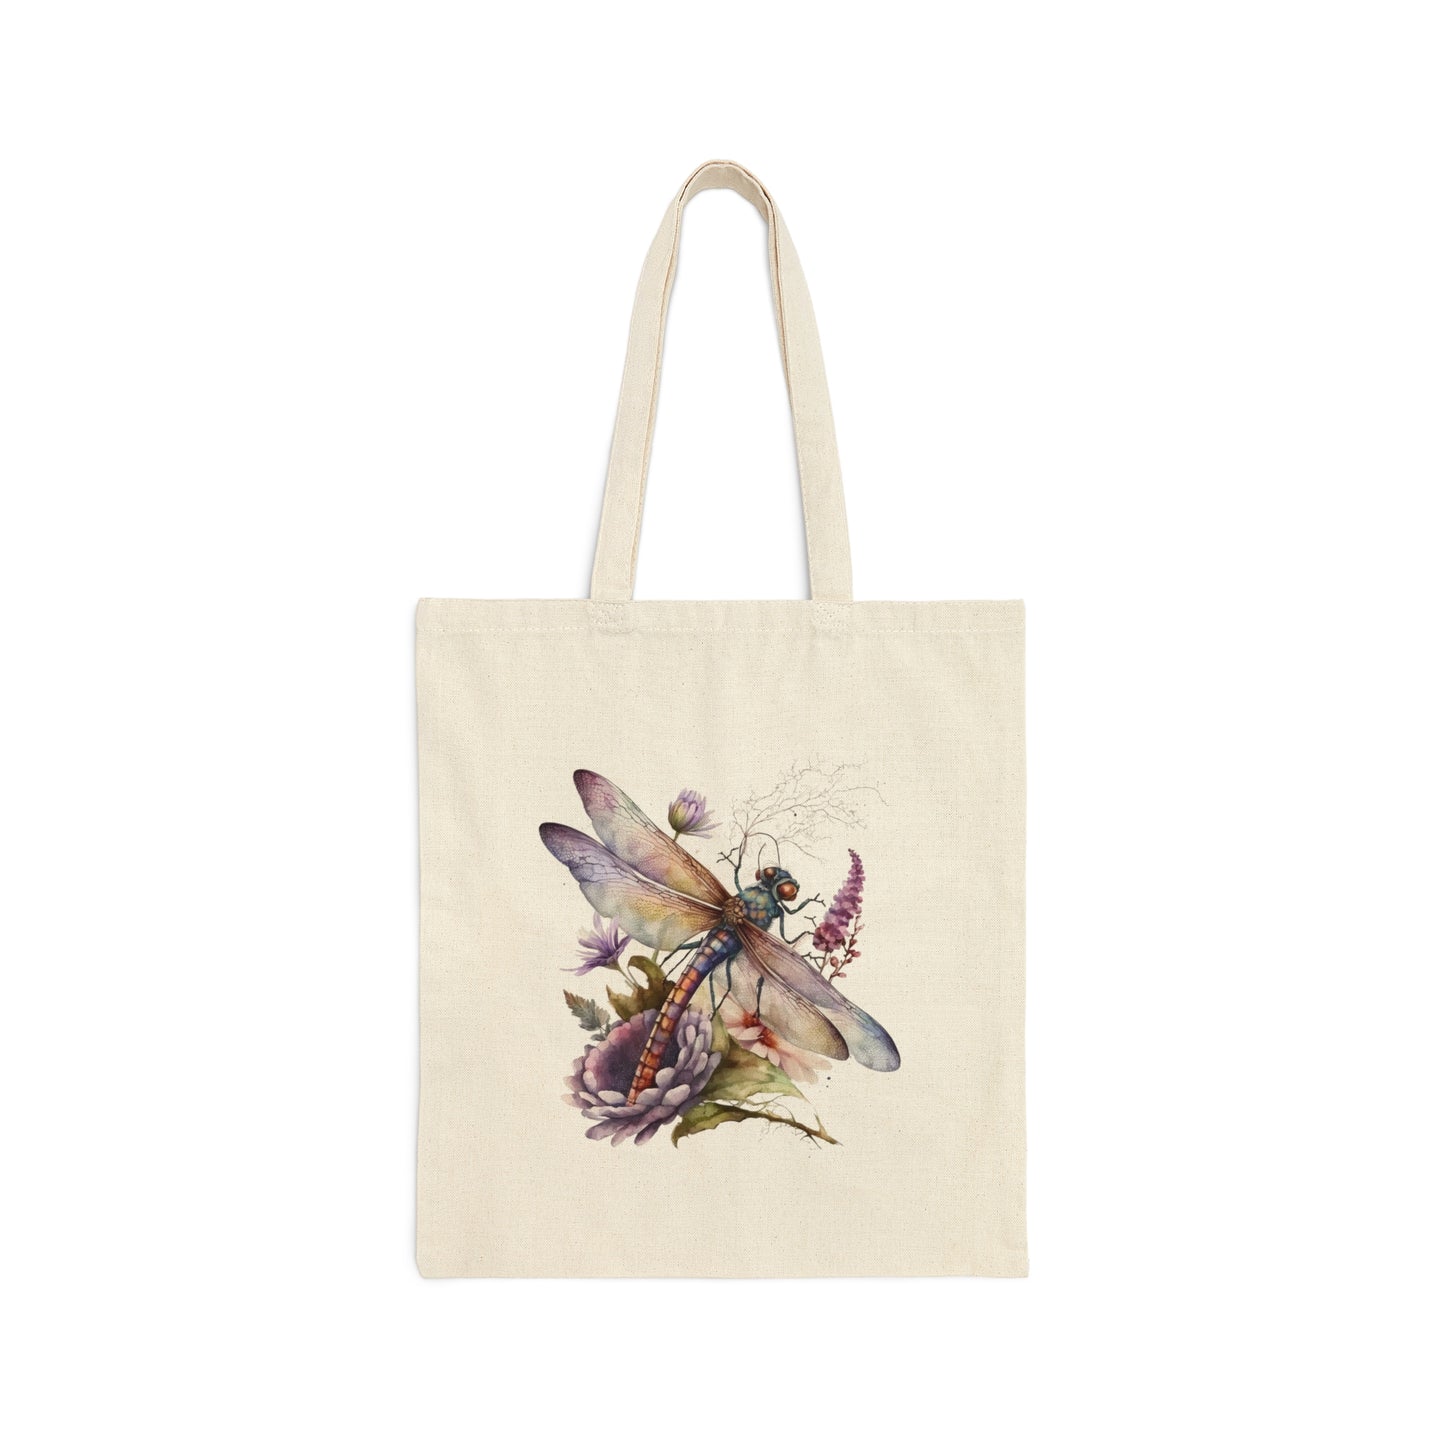 Dragonfly Tote Bag / Personalized Tote Bag